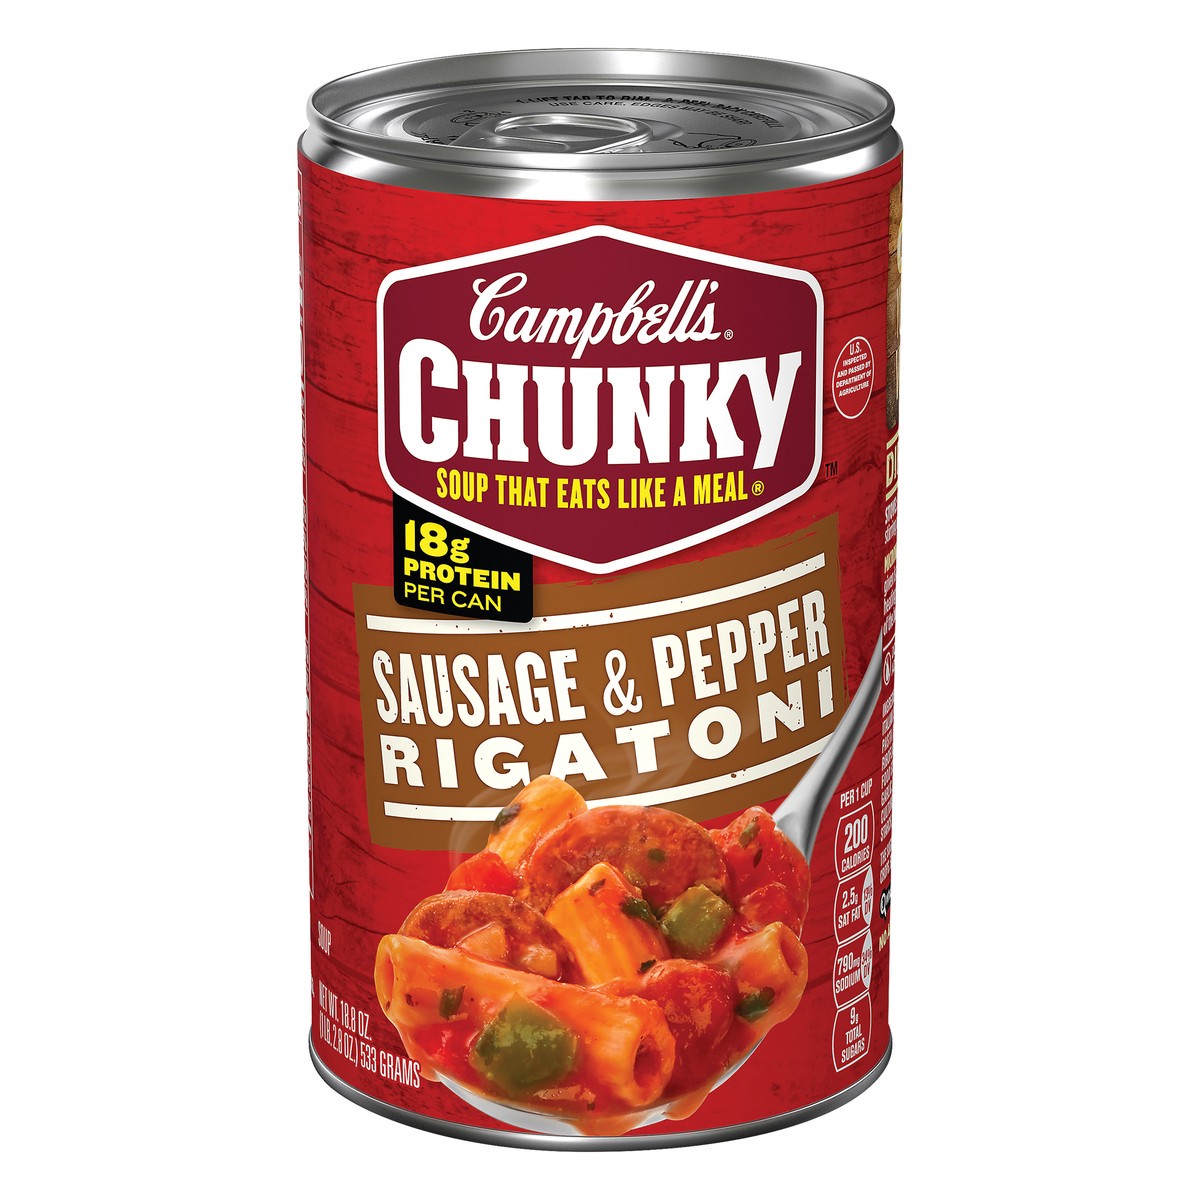 slide 13 of 13, Campbell's Chunky Soup, Sausage & Pepper Rigatoni Soup, 18.8 Ounce Can, 18.8 oz